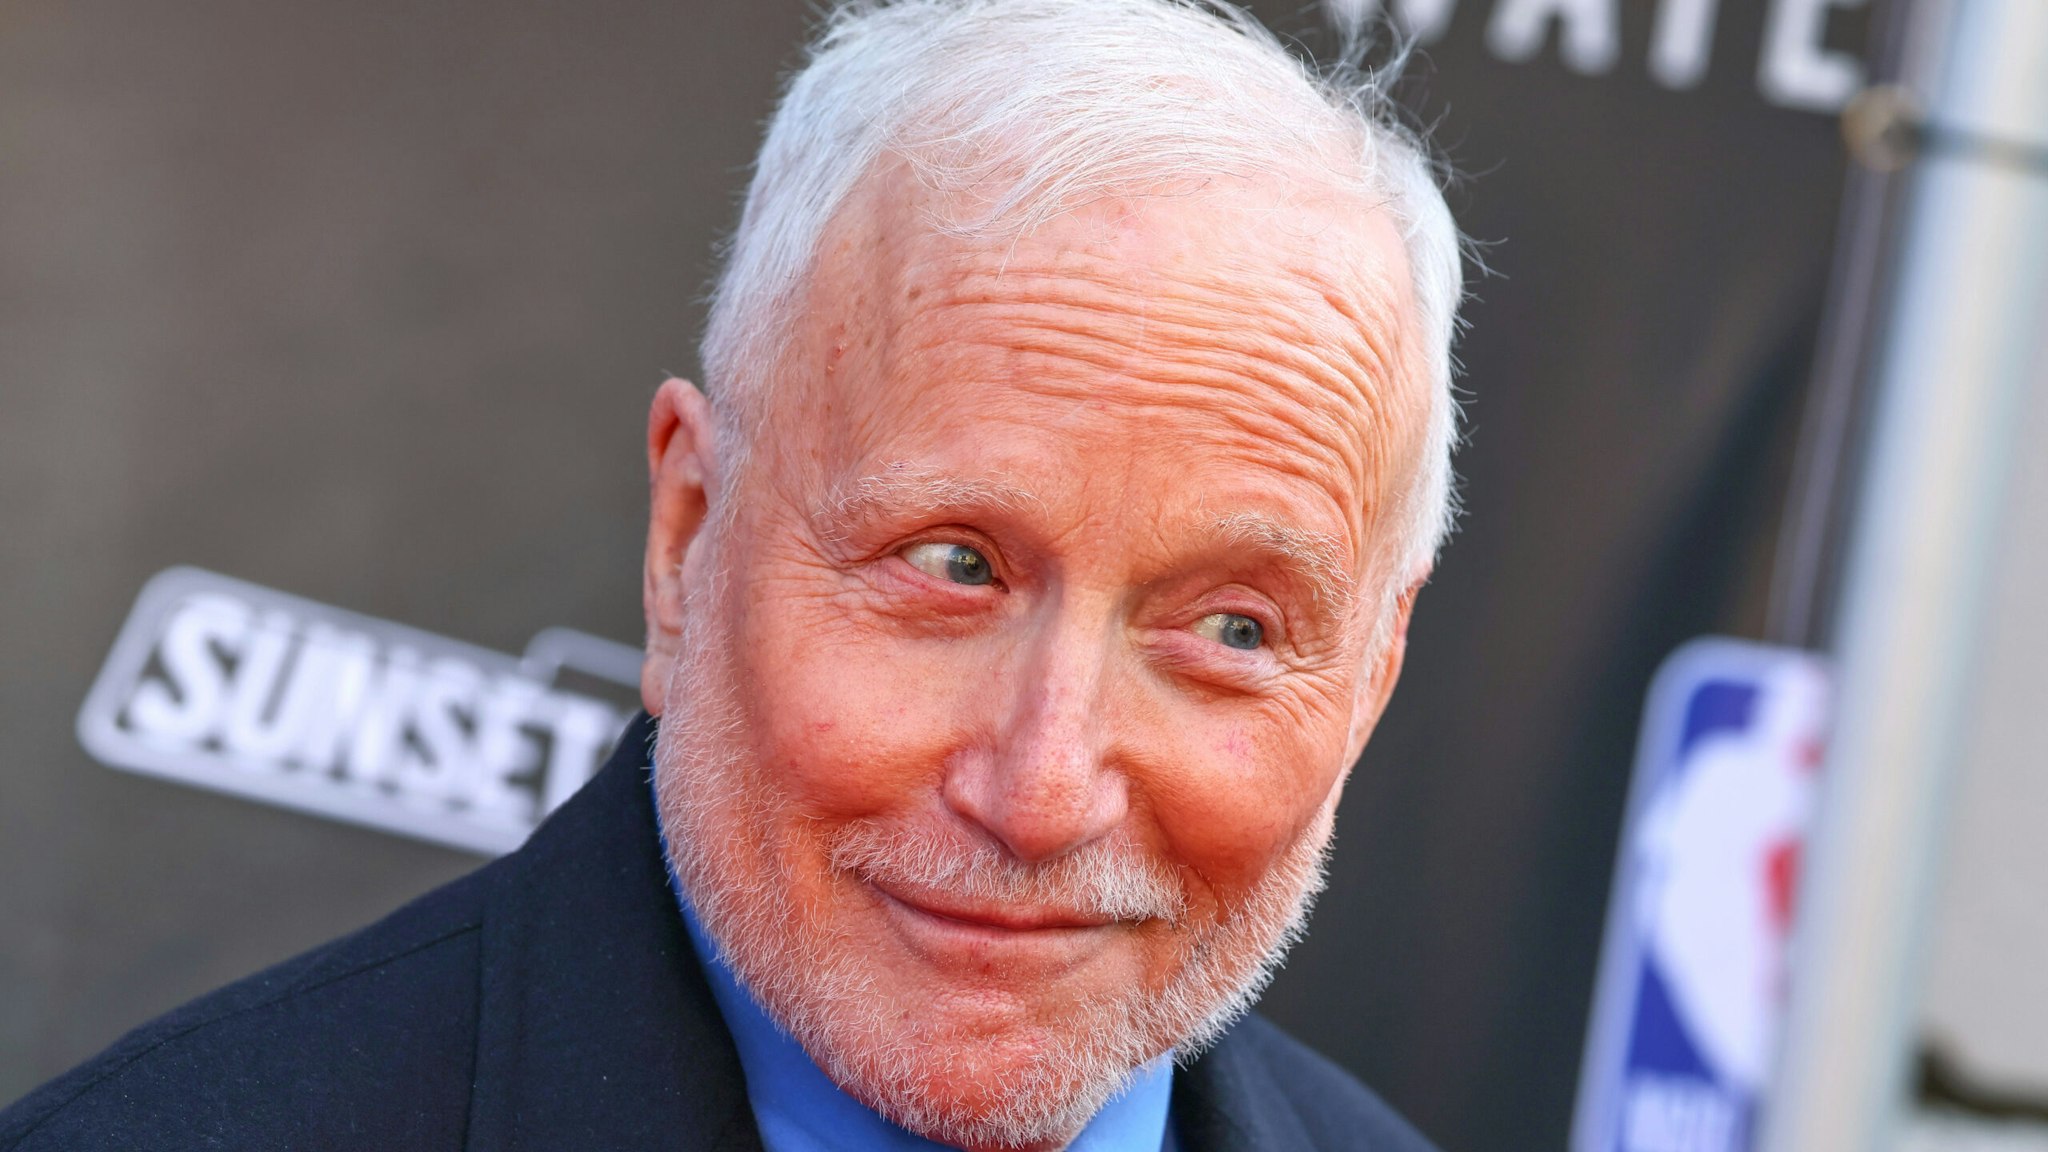 Actor Richard Dreyfuss warns that Americans not knowing the constitution will have dire consequences